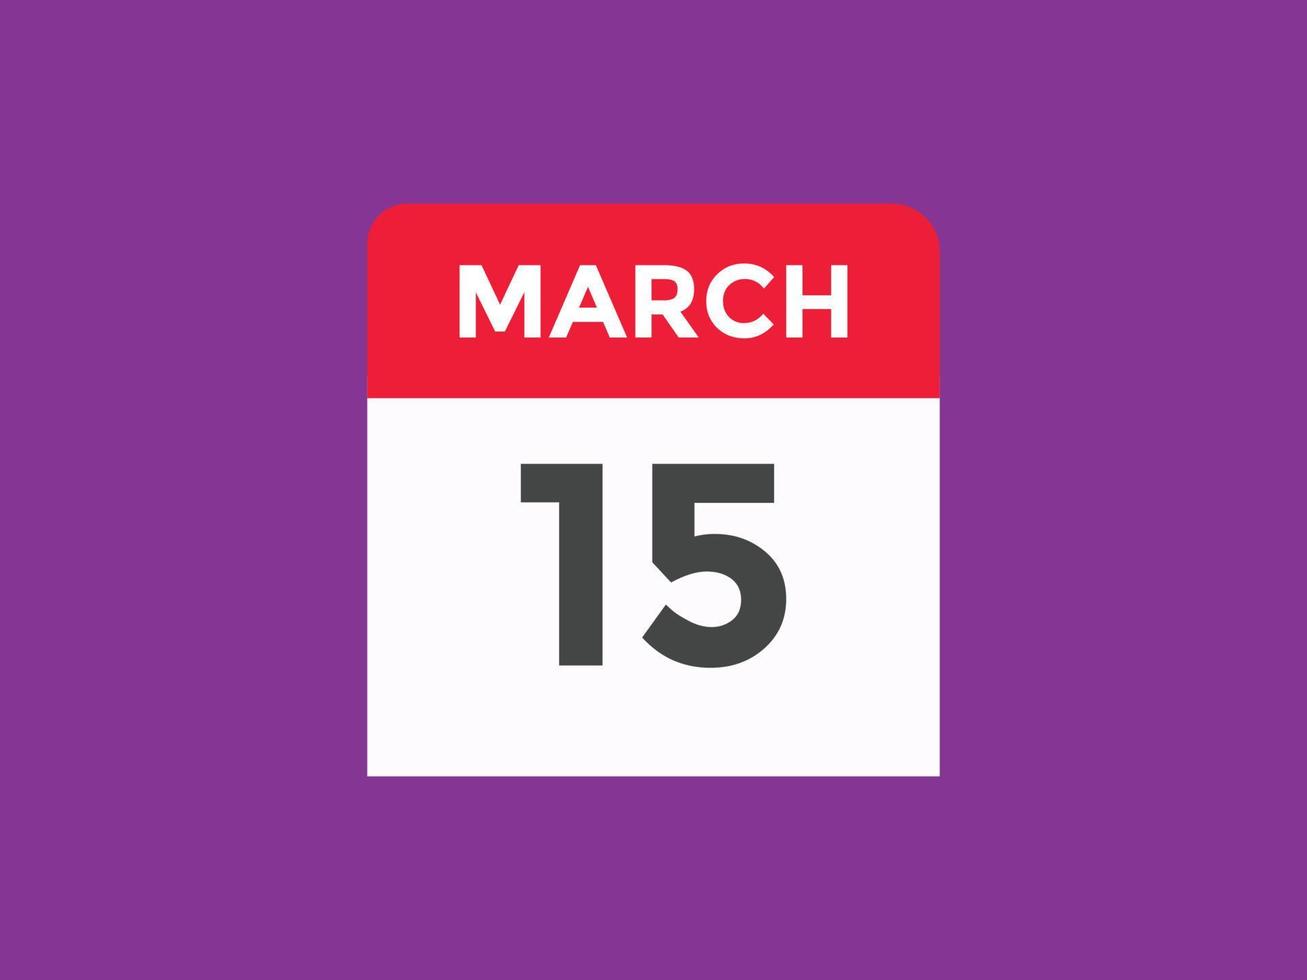 march 15 calendar reminder. 15th march daily calendar icon template. Calendar 15th march icon Design template. Vector illustration